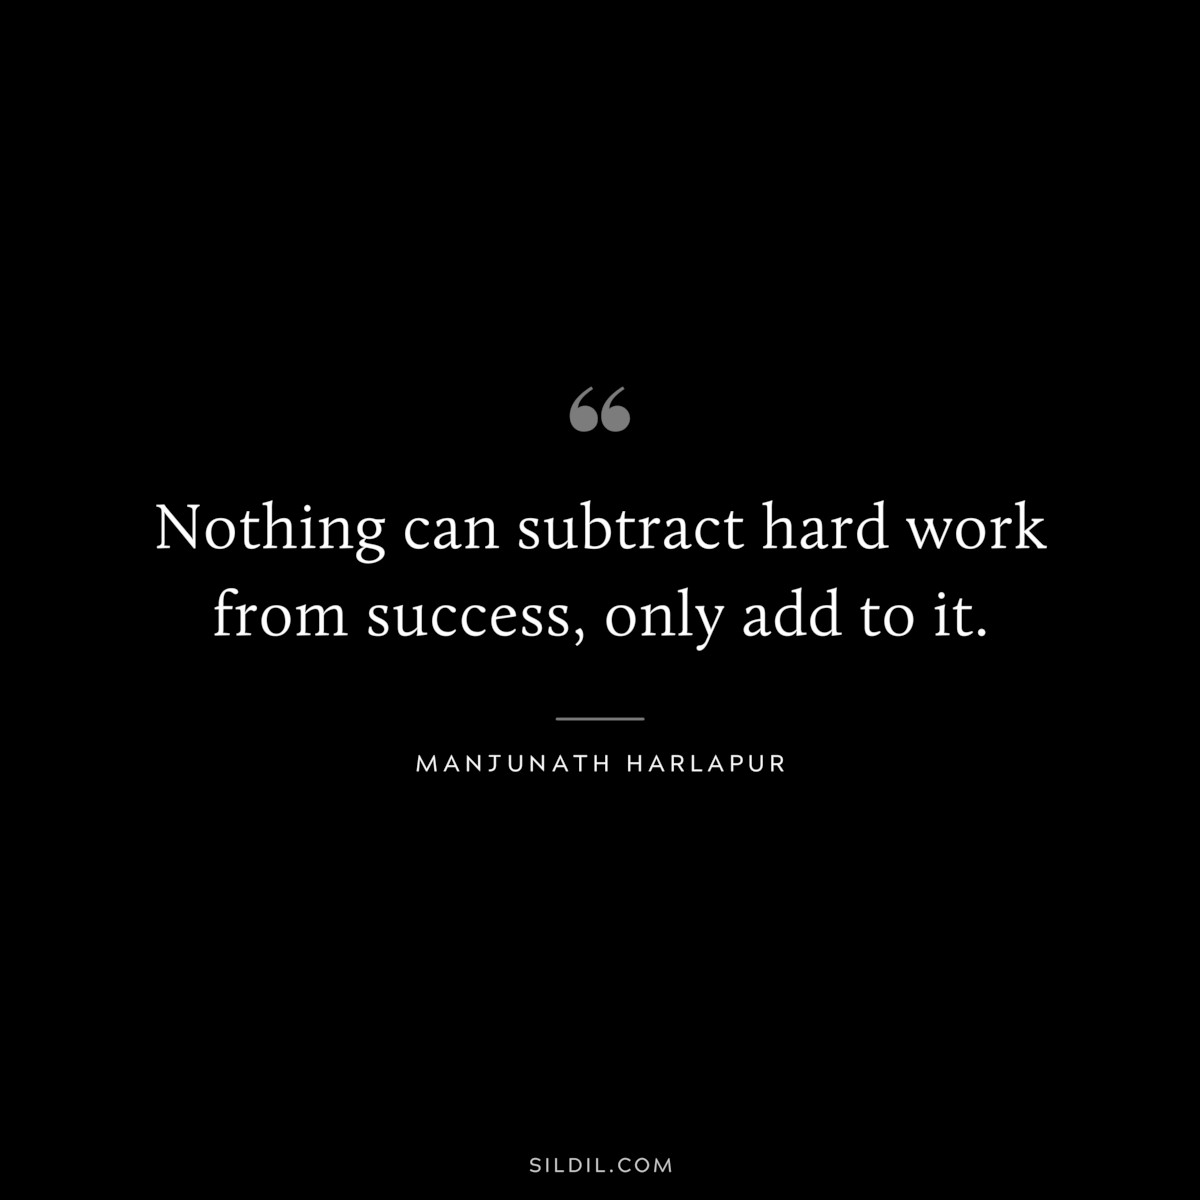 Nothing can subtract hard work from success, only add to it. ― Manjunath Harlapur